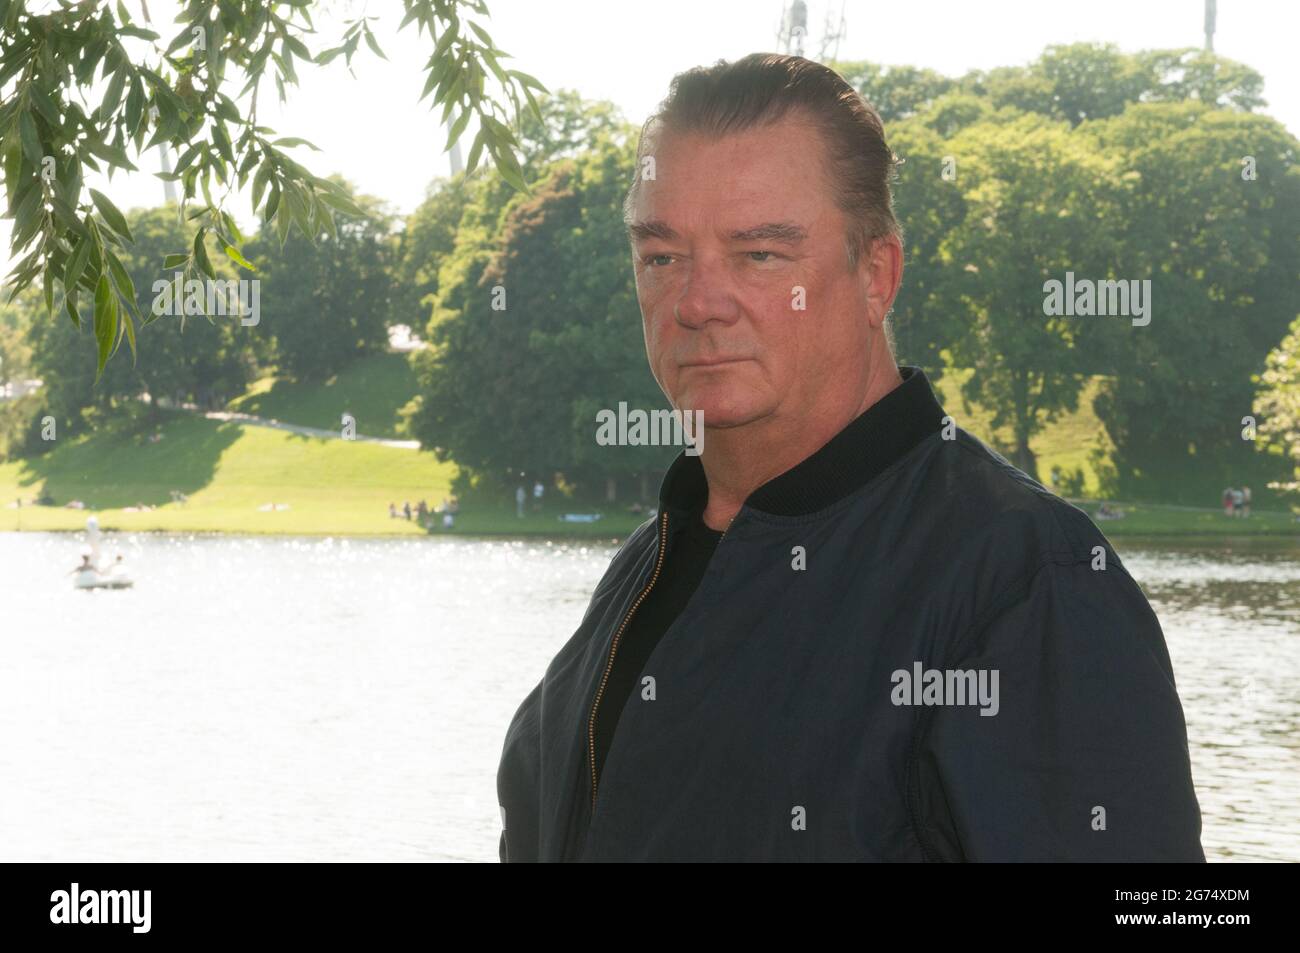 Actor Peter Kurth seen at 'Kino am Olympiasee' before the screening of his new series 'Glauben' from Ferdinand von Schirach during Filmfest München Stock Photo